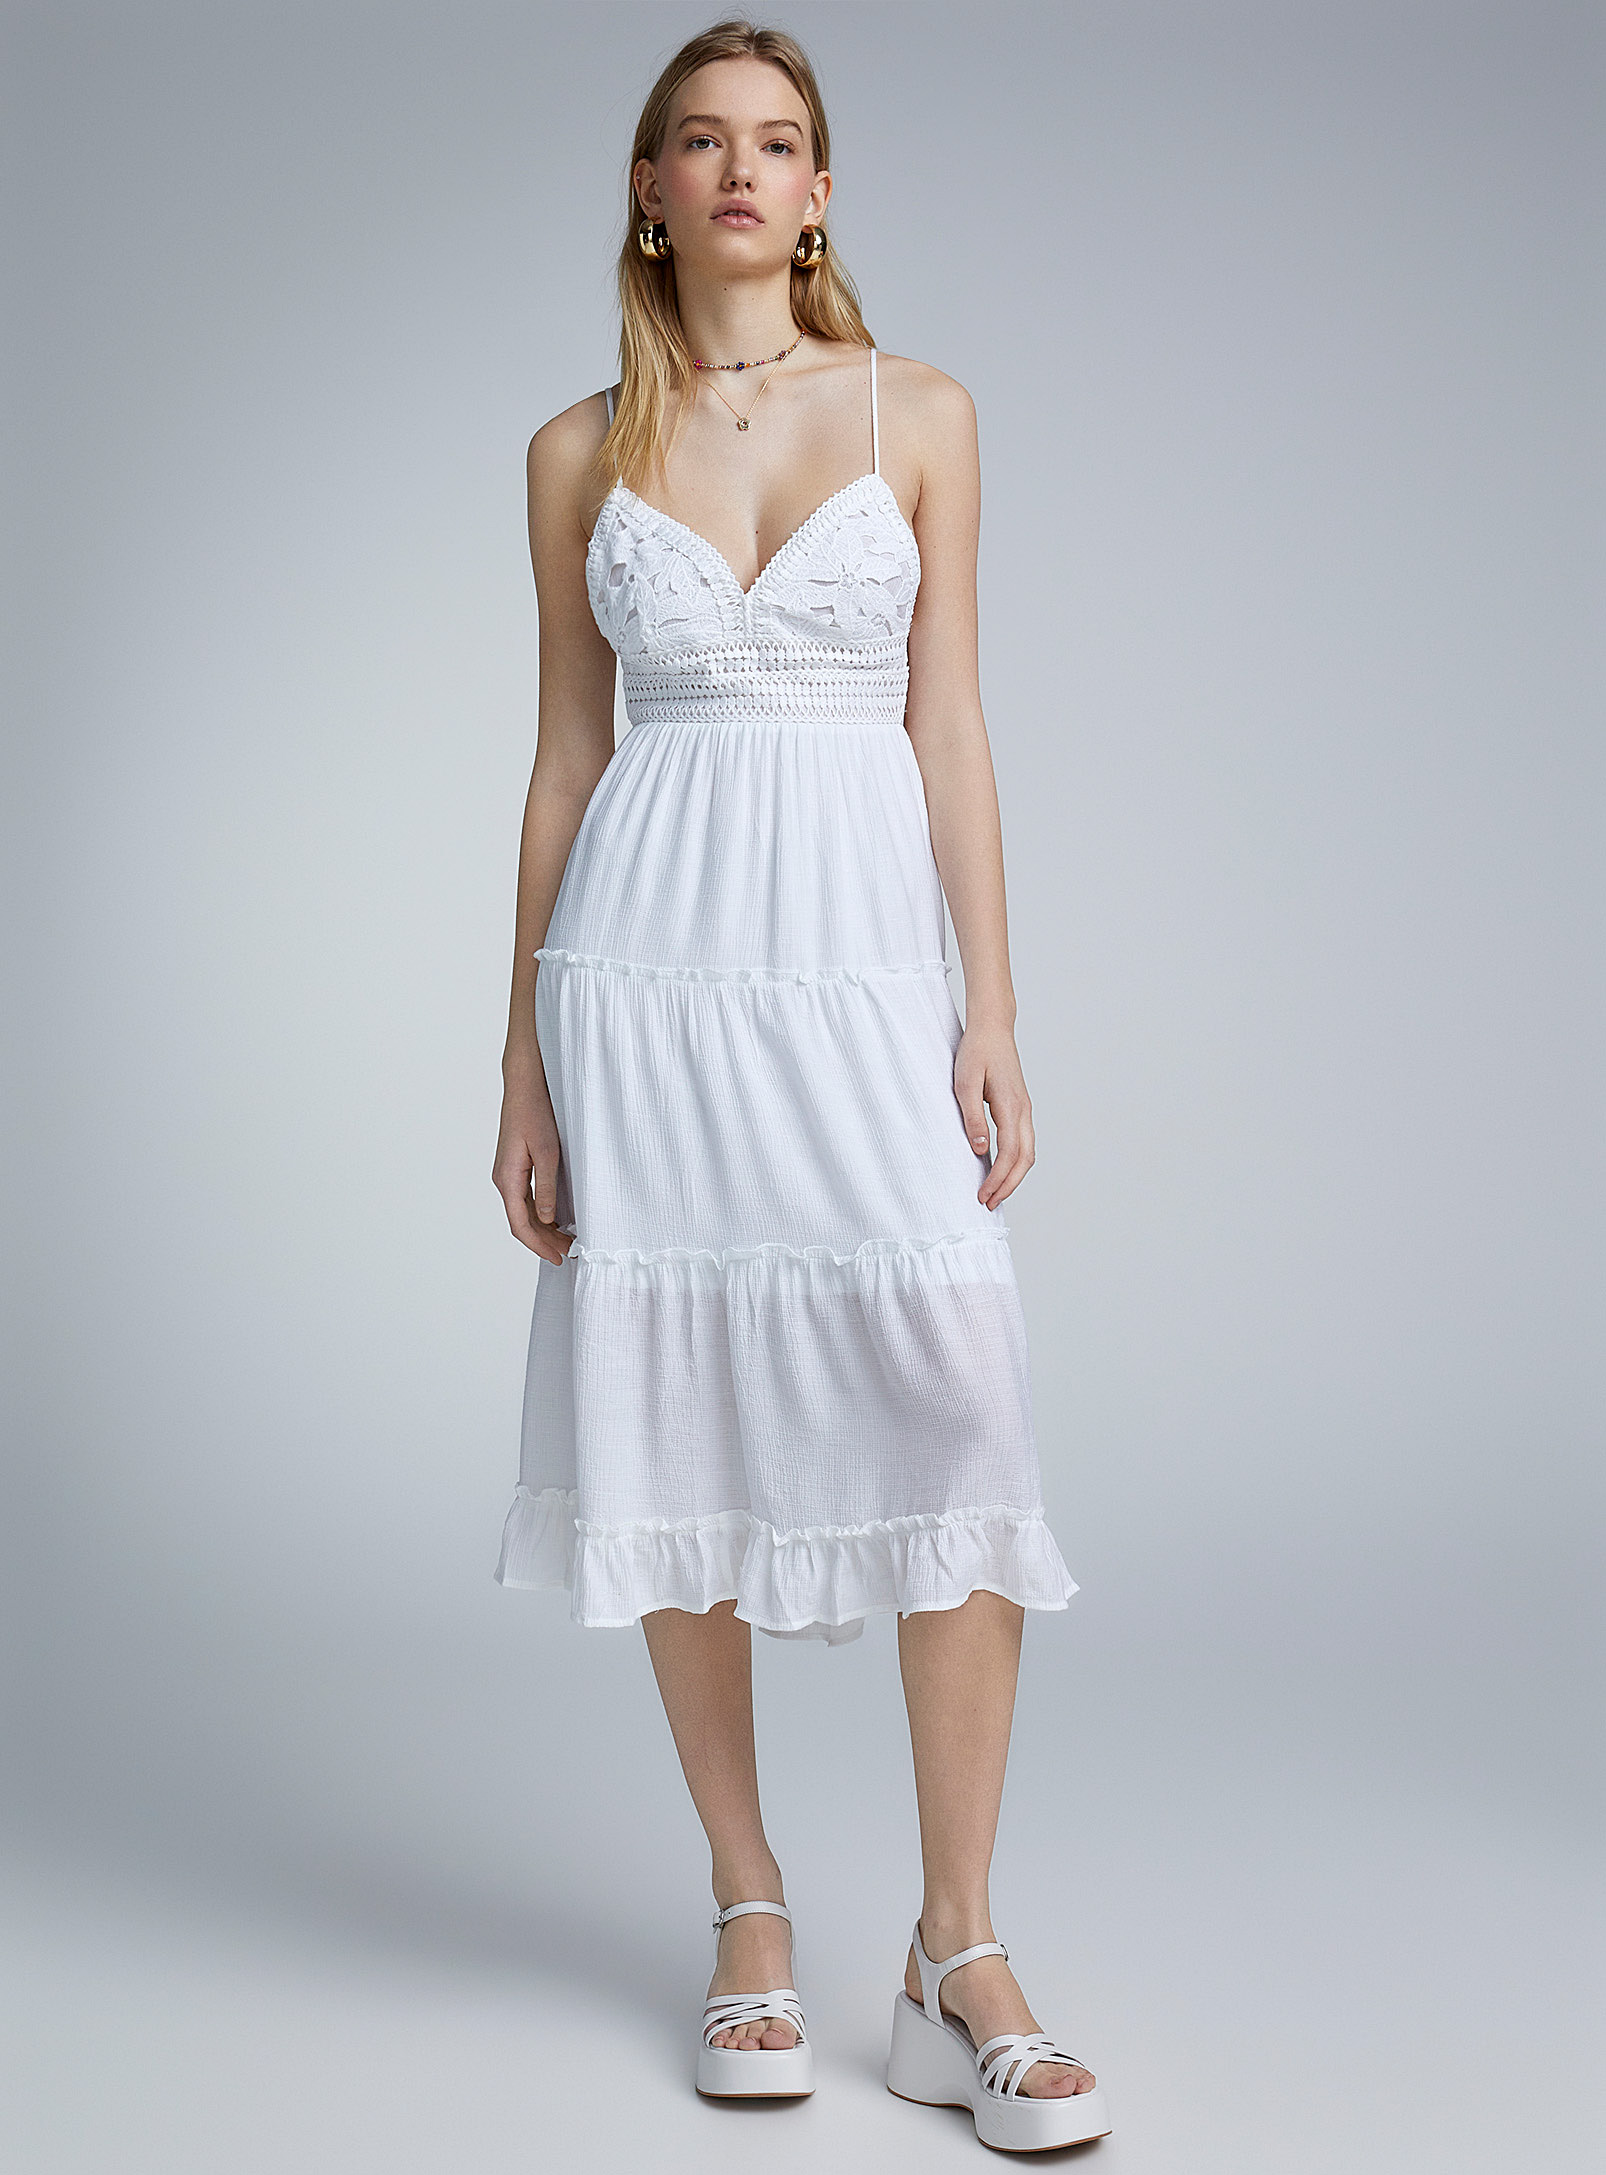 Twik Tie Back And Crochet Peasant Dress In White